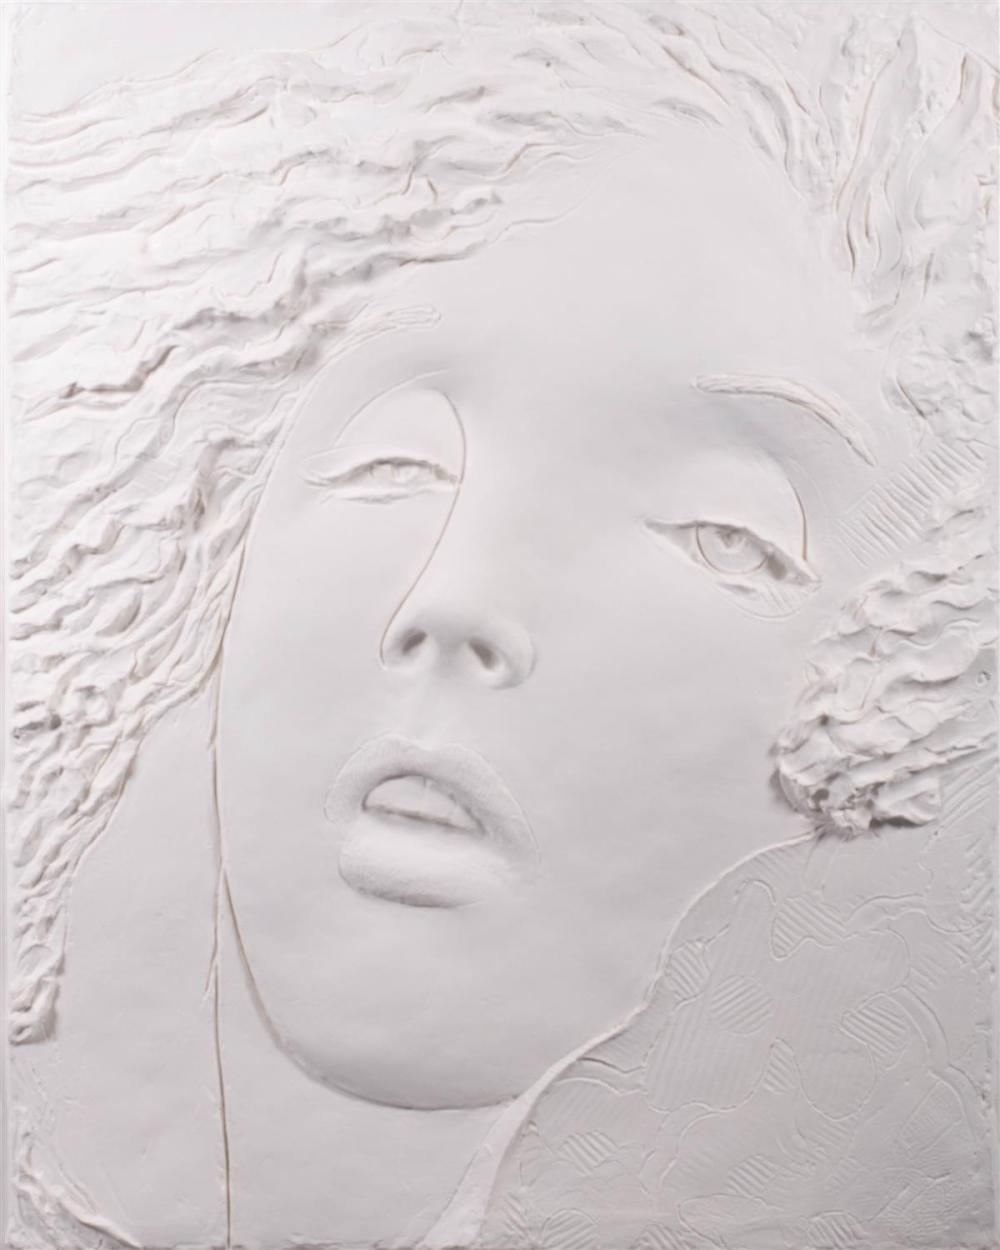 UNTITLED - (WOMAN'S FACE), PRESSED